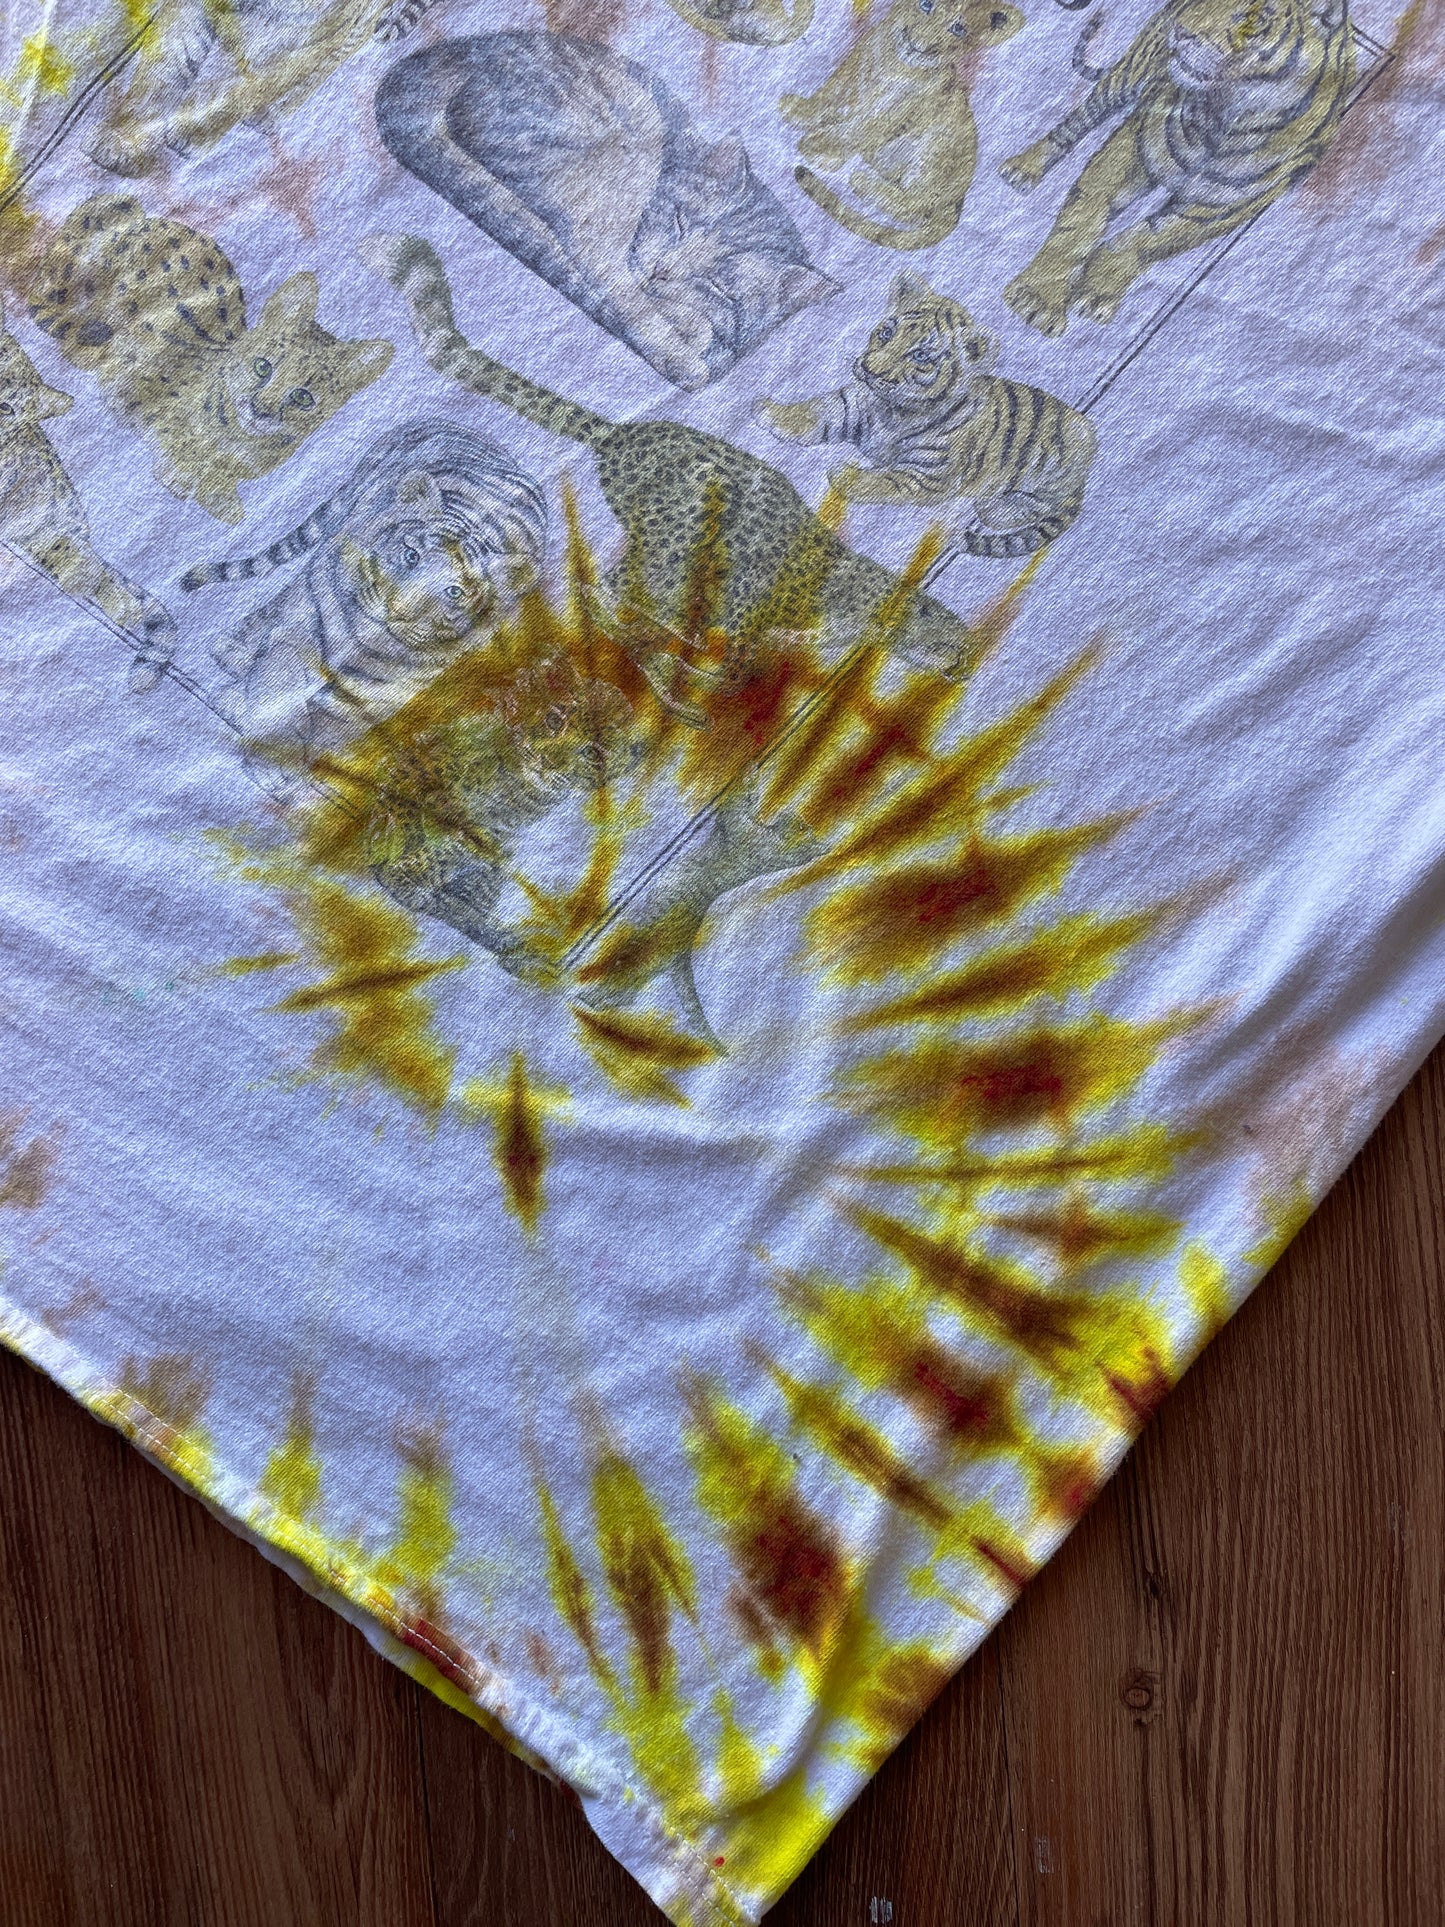 XL Men’s Cool Cats & Kittens Handmade Tie Dye T-Shirt | One-Of-a-Kind Yellow and White Spiral Short Sleeve